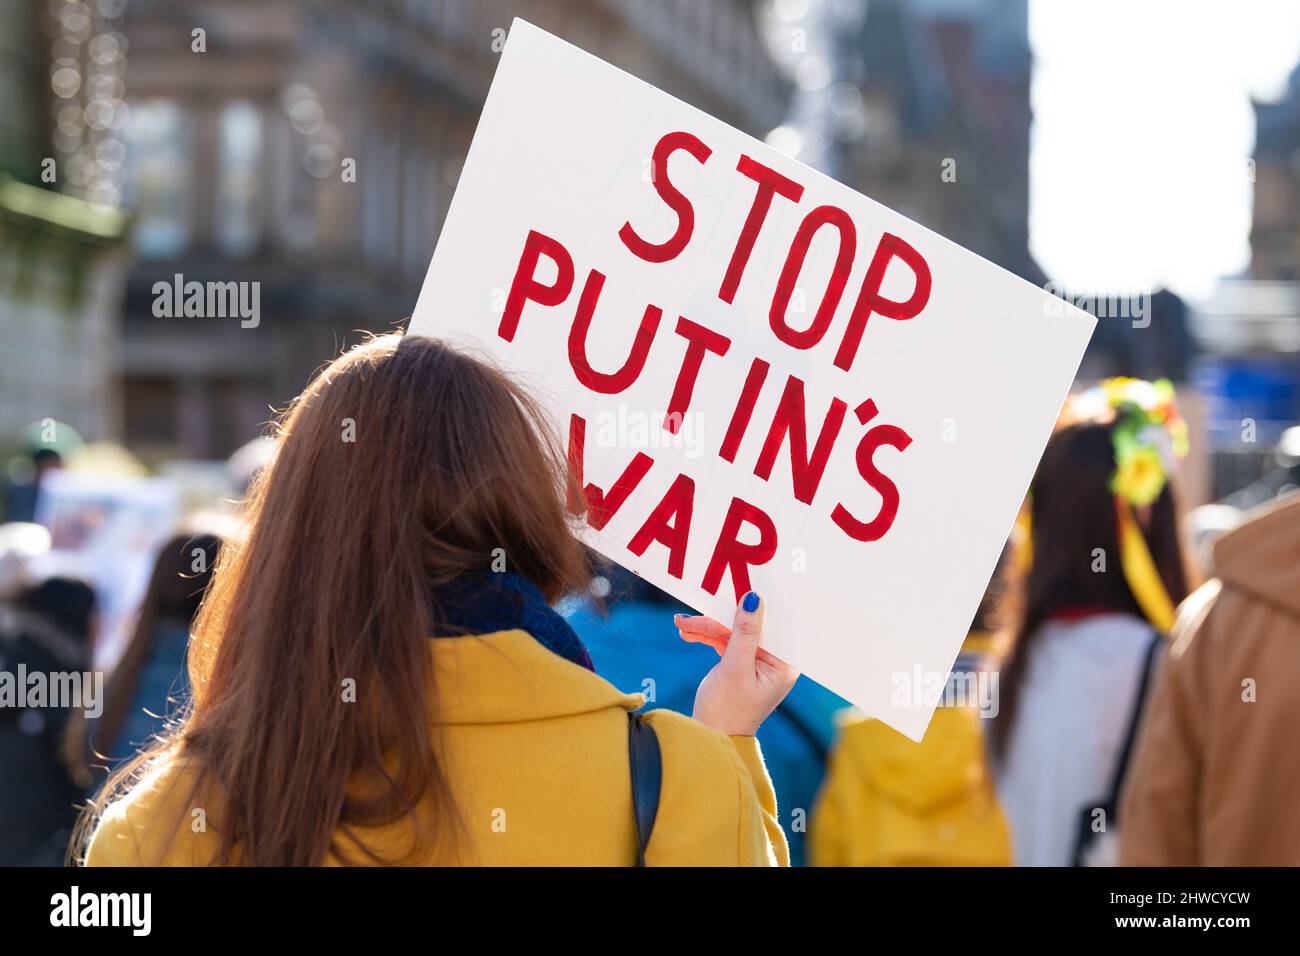 George Square, Glasgow, Scotland, UK. 5th Mar, 2022. People protesting in Glasgow's George Square against the Russian invasion of Ukraine. Pictured: sign saying 'Stop Putin's War'  Credit: Kay Roxby/Alamy Live News Stock Photo